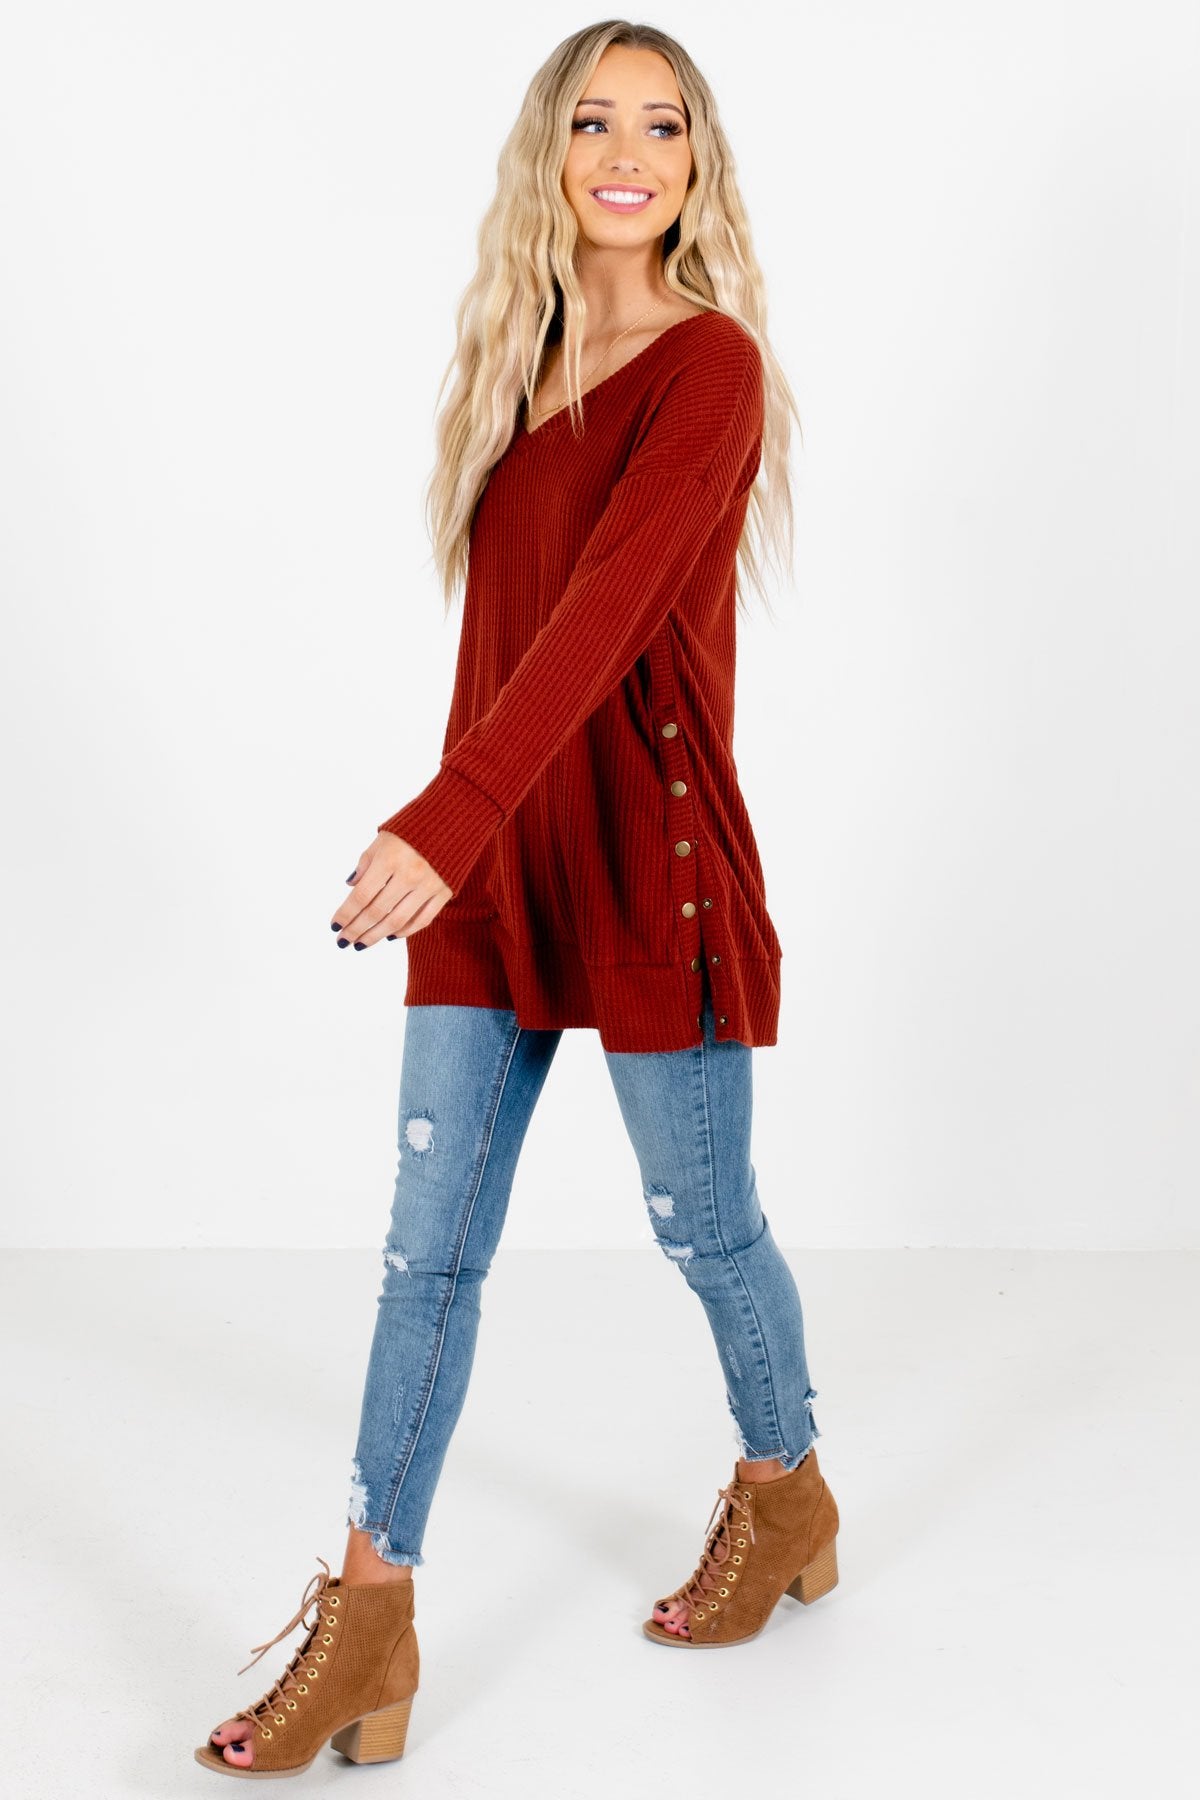 Rust Red Cute and Comfortable Boutique Tops for Women